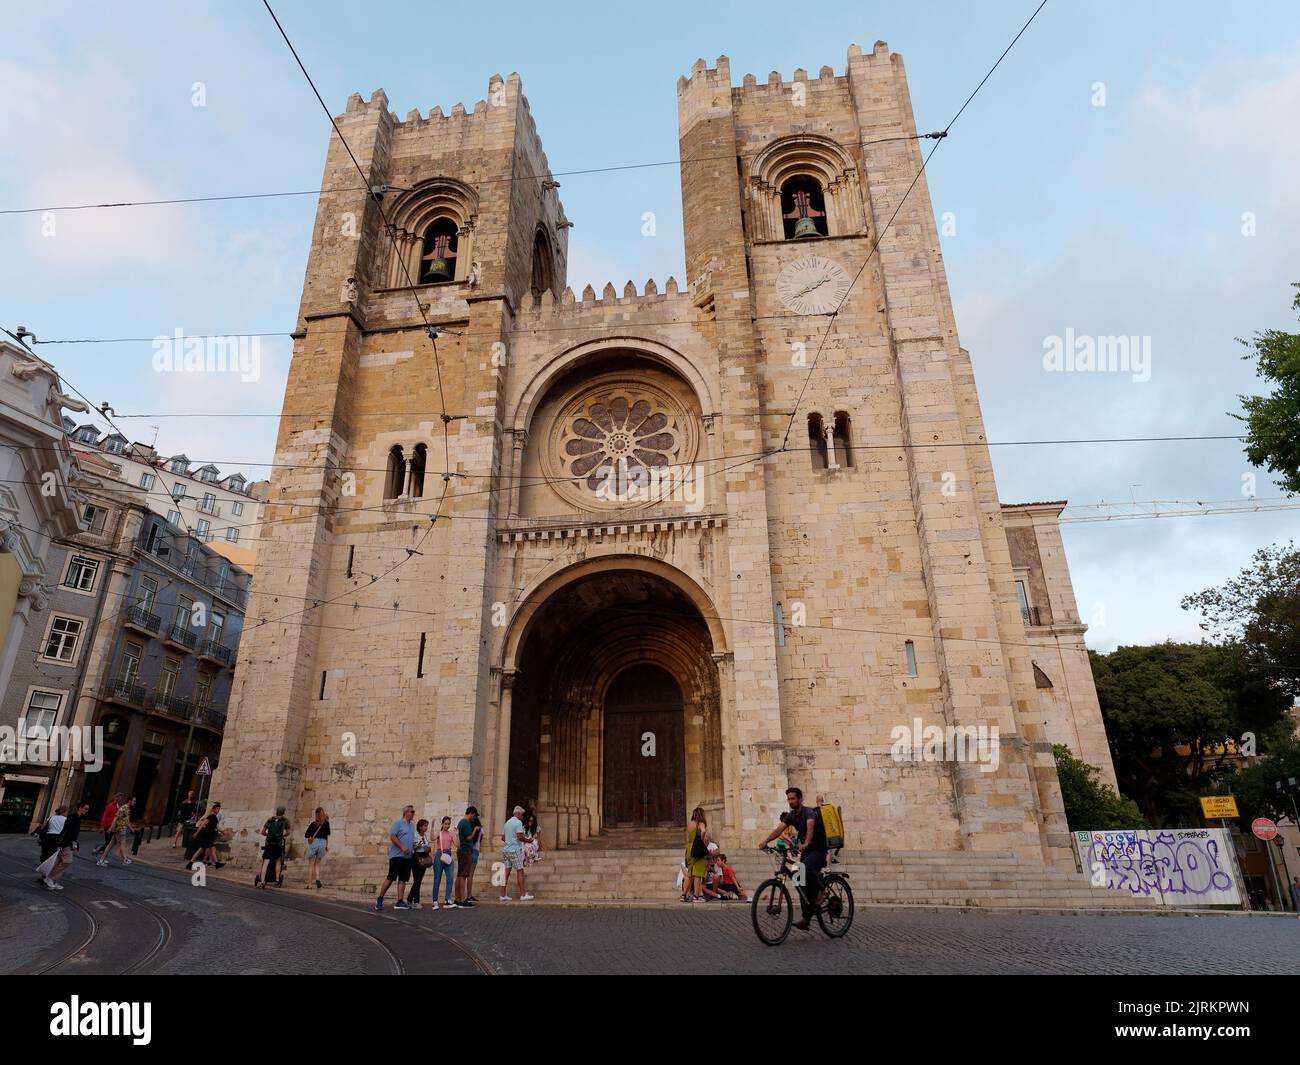 Cathedral of Saint Mary Major aka Lisbon Cathedral aka Sé de Lisboa. Tourists walk in the street and someone rides a bicycle. Stock Photo